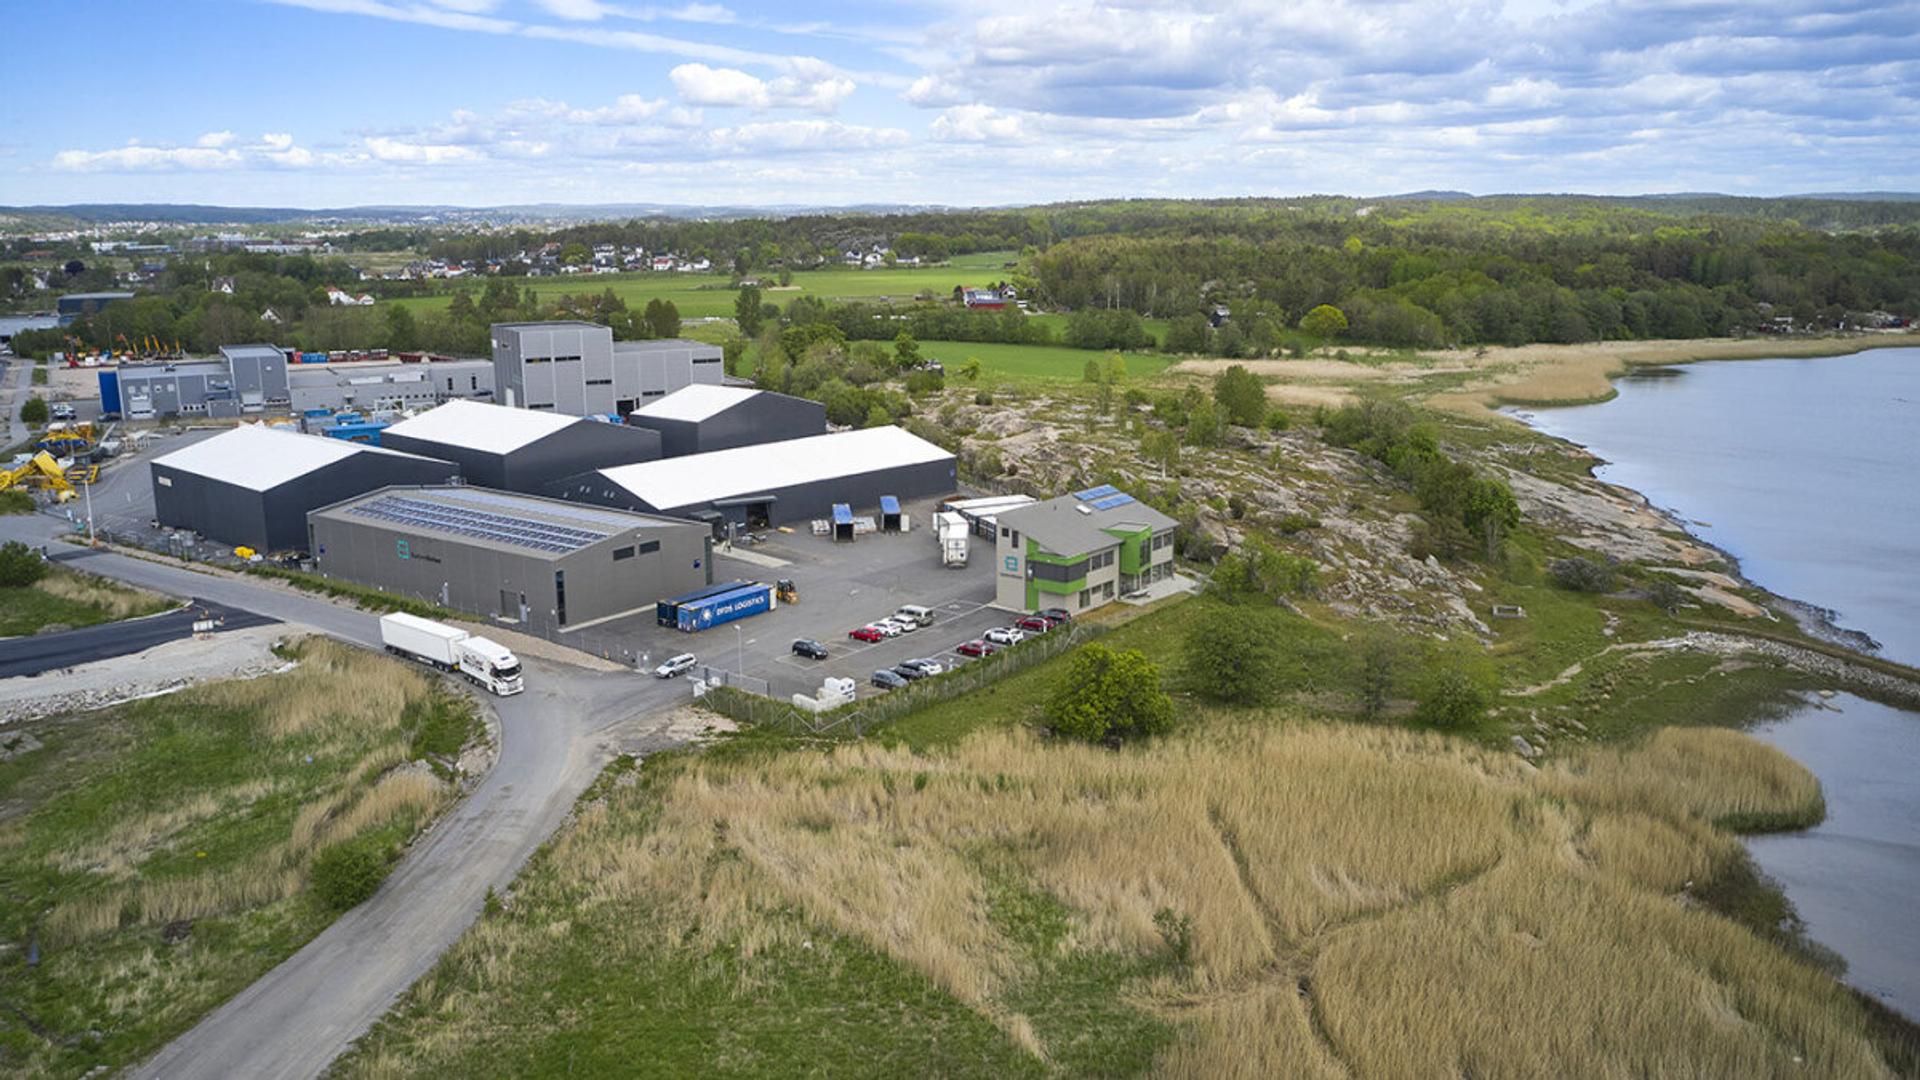 The HydroVolt battery recycling plant in Fredrikstad, Norway